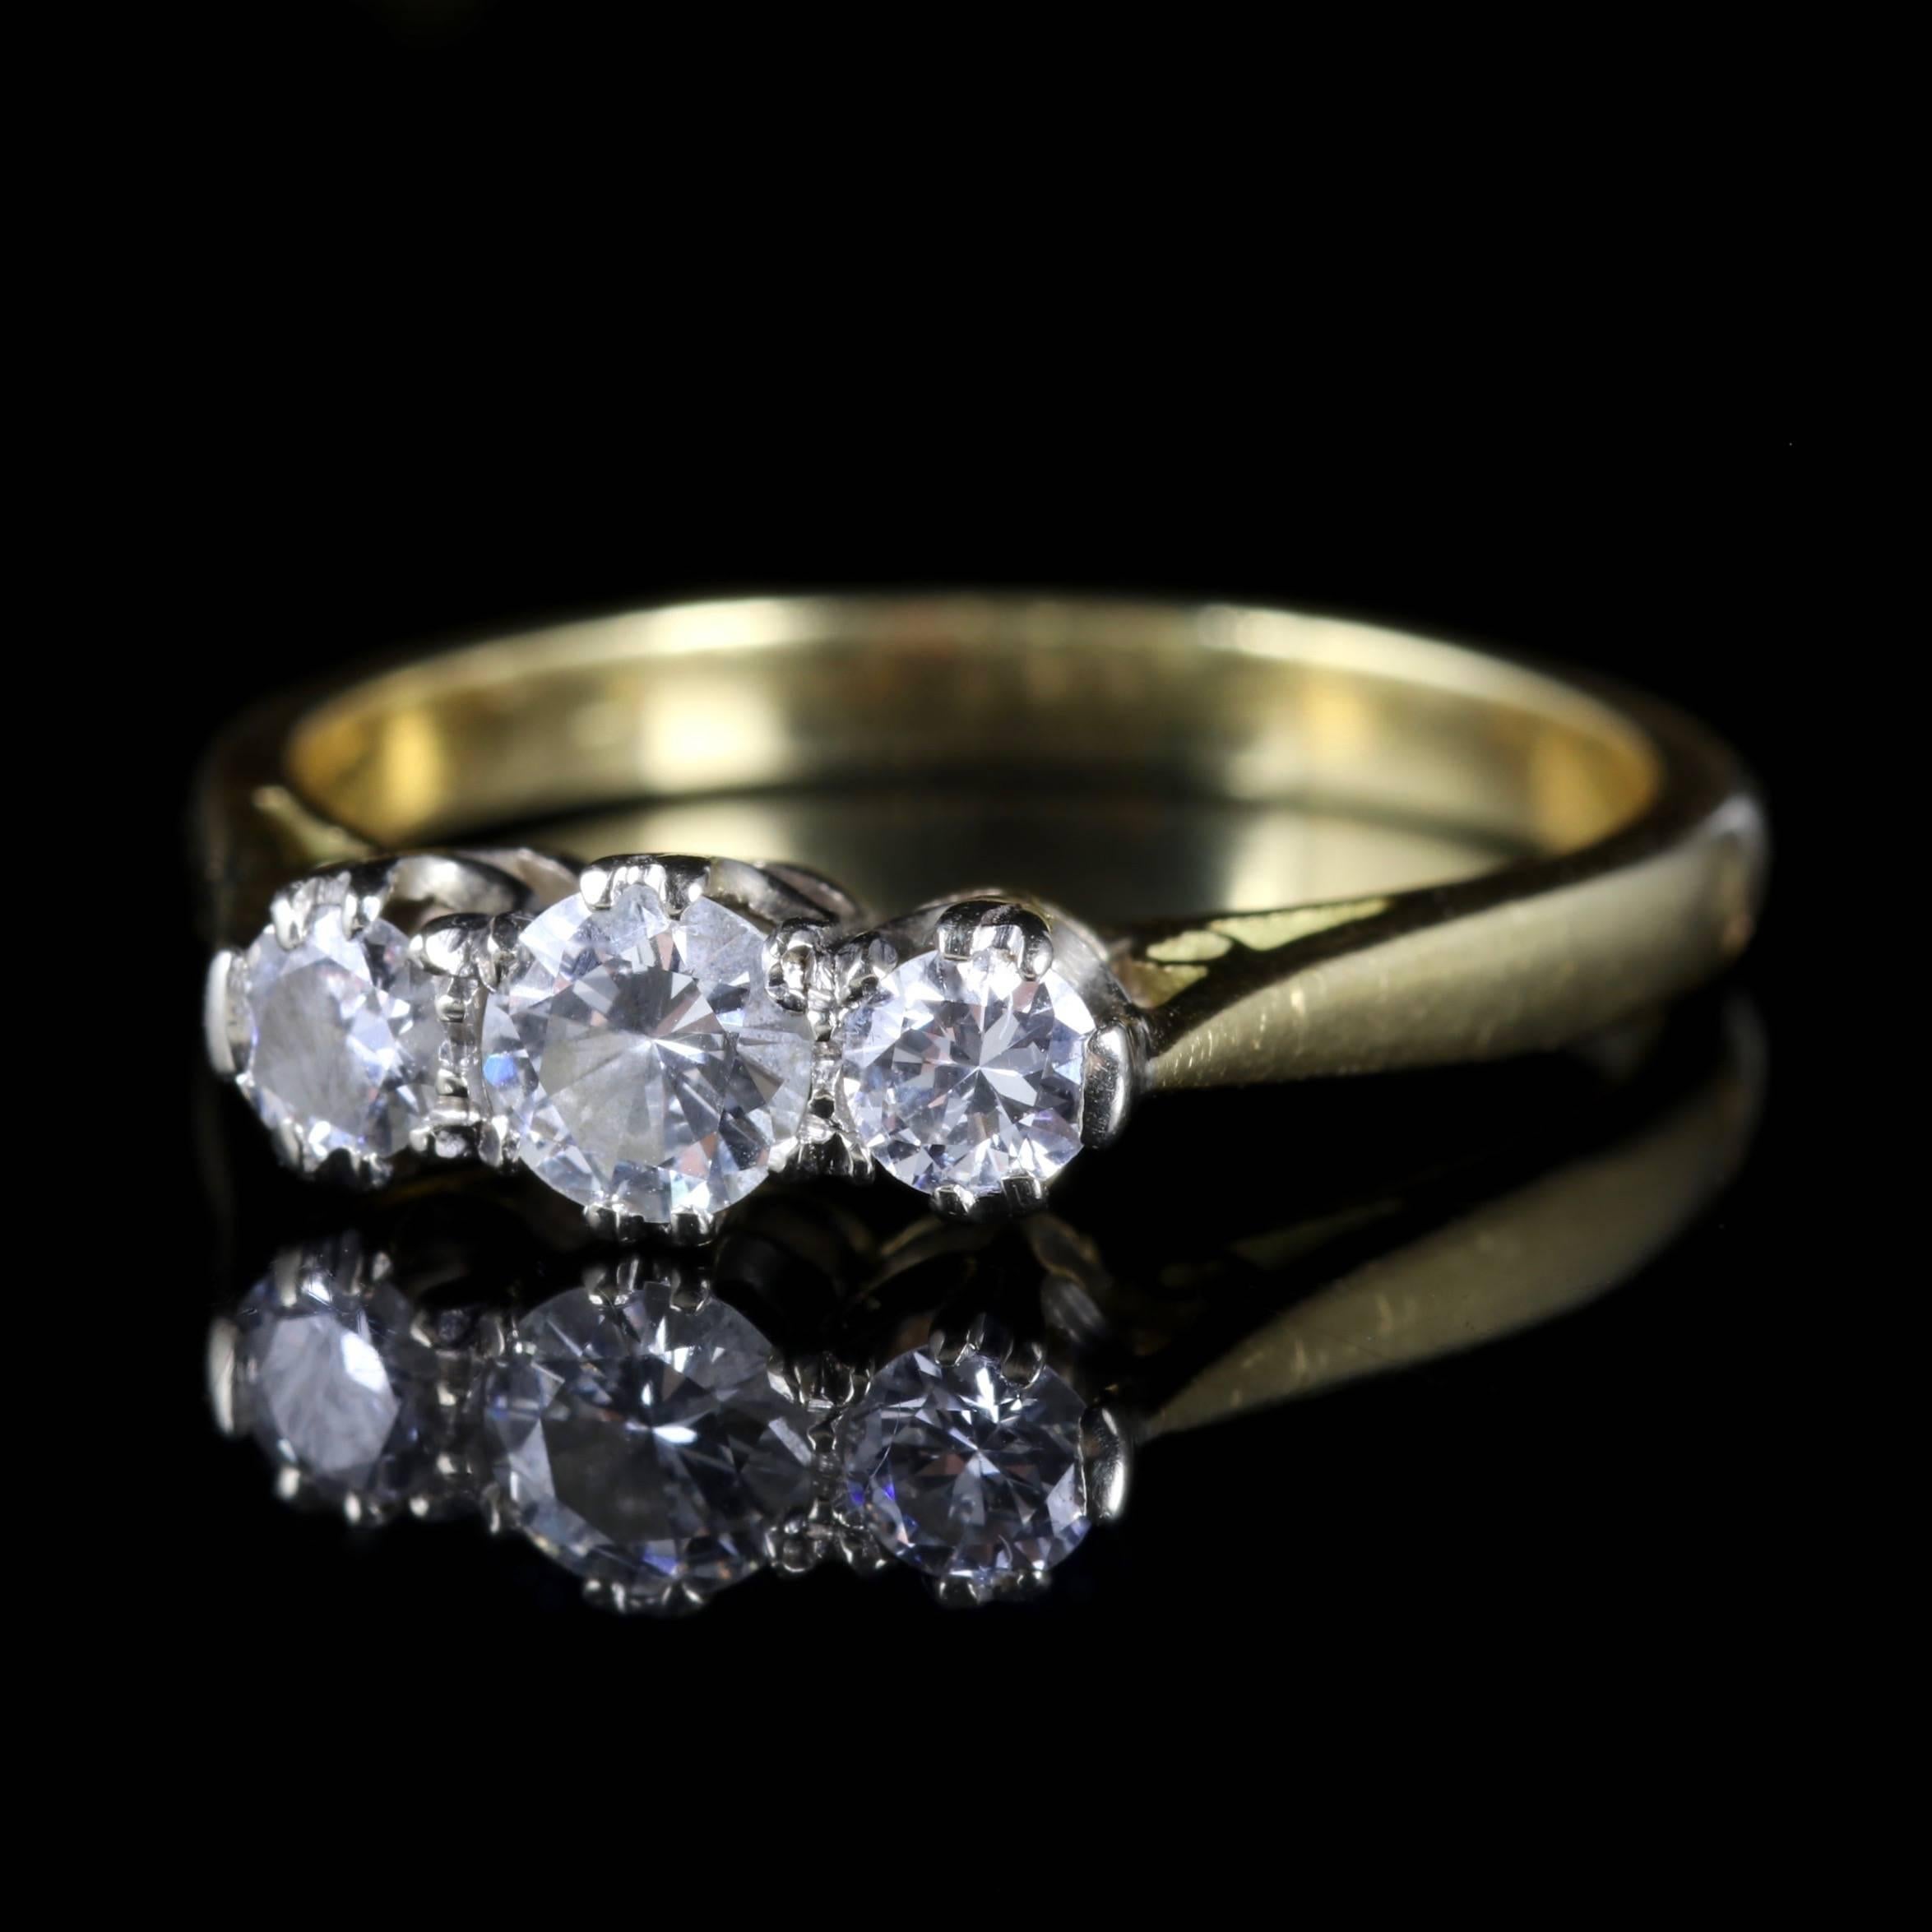 This fabulous Edwardian Diamond trilogy ring is set in 18ct Yellow Gold and Platinum, Circa 1915.
 
The central Diamond is 0.20ct with the ouster Diamond being both 0.08ct each, which makes a total of 0.36ct of sparkling Diamonds in total.

Trilogy